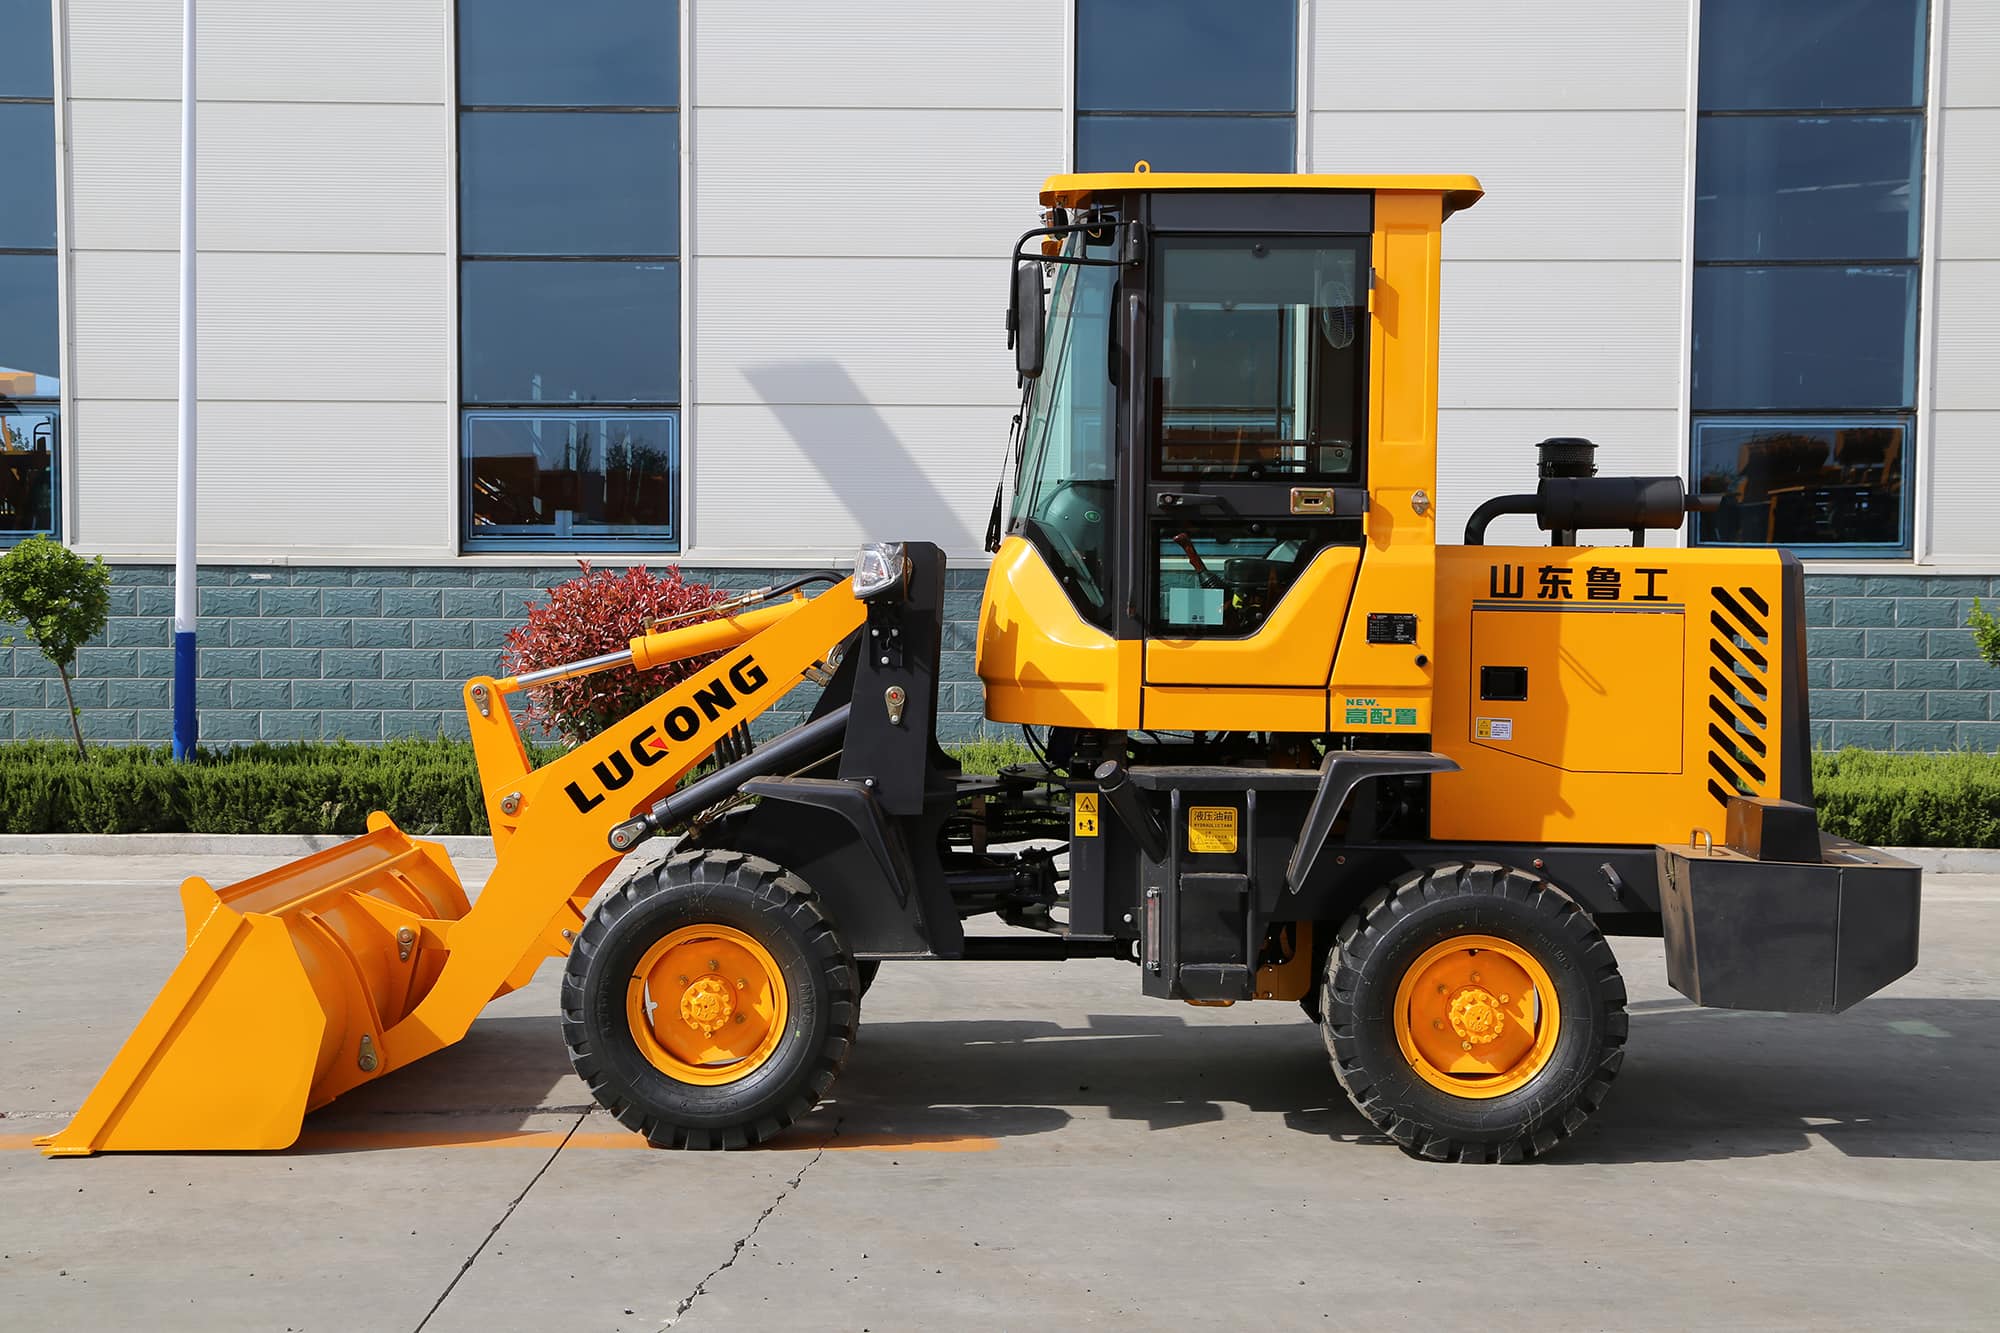 LUGONG L920 Front End Loader Small/Mini Wheel Loader with Ce